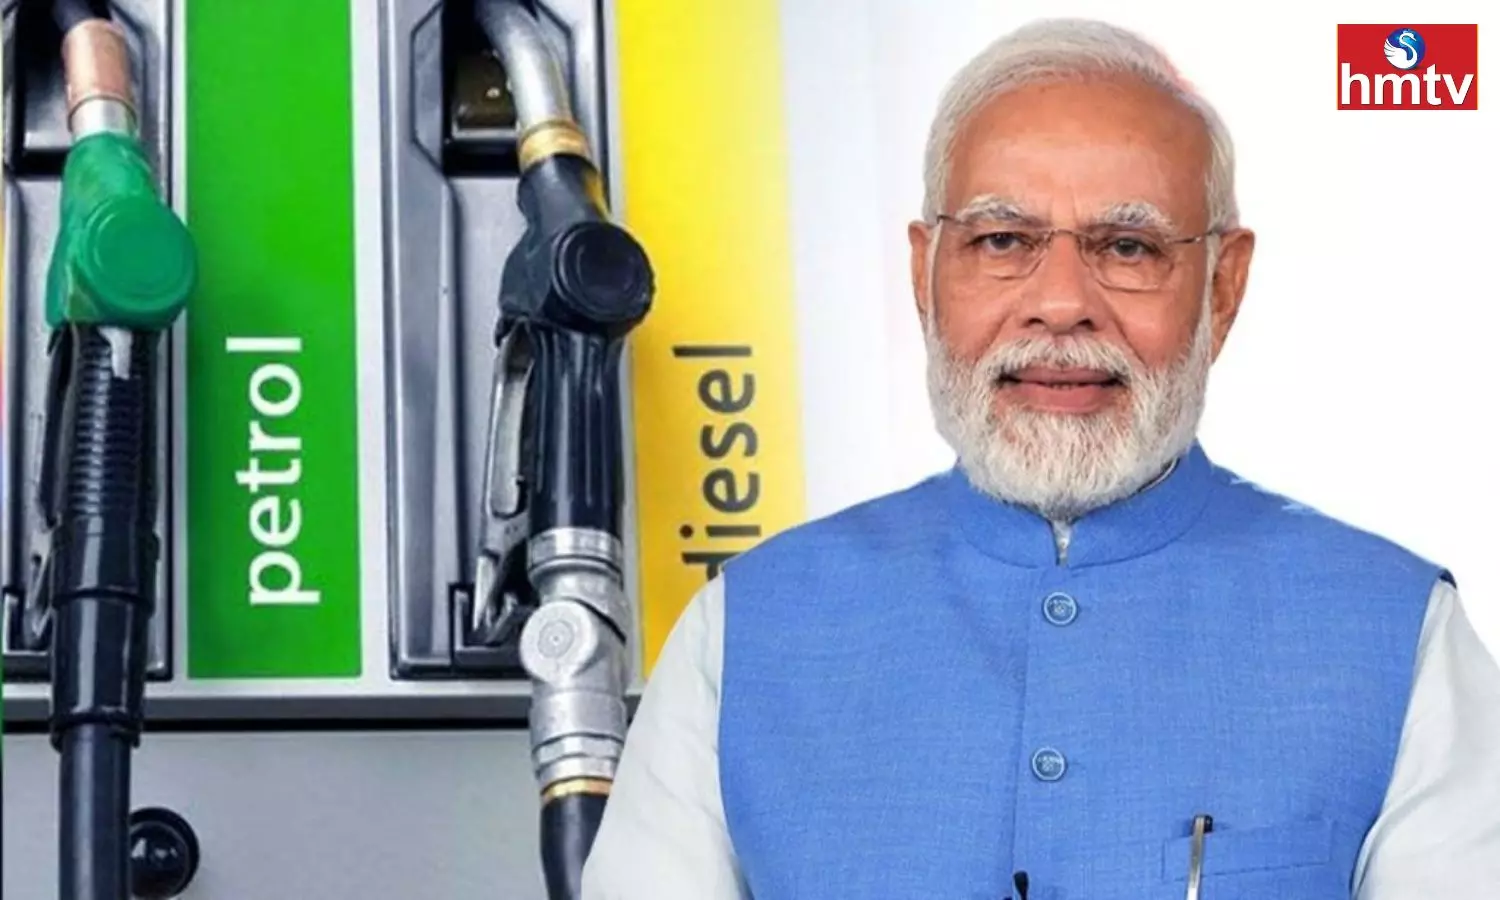 PM Modi to Announce Massive Cuts in Petrol and Diesel Prices Announcement Very Soon Says Report